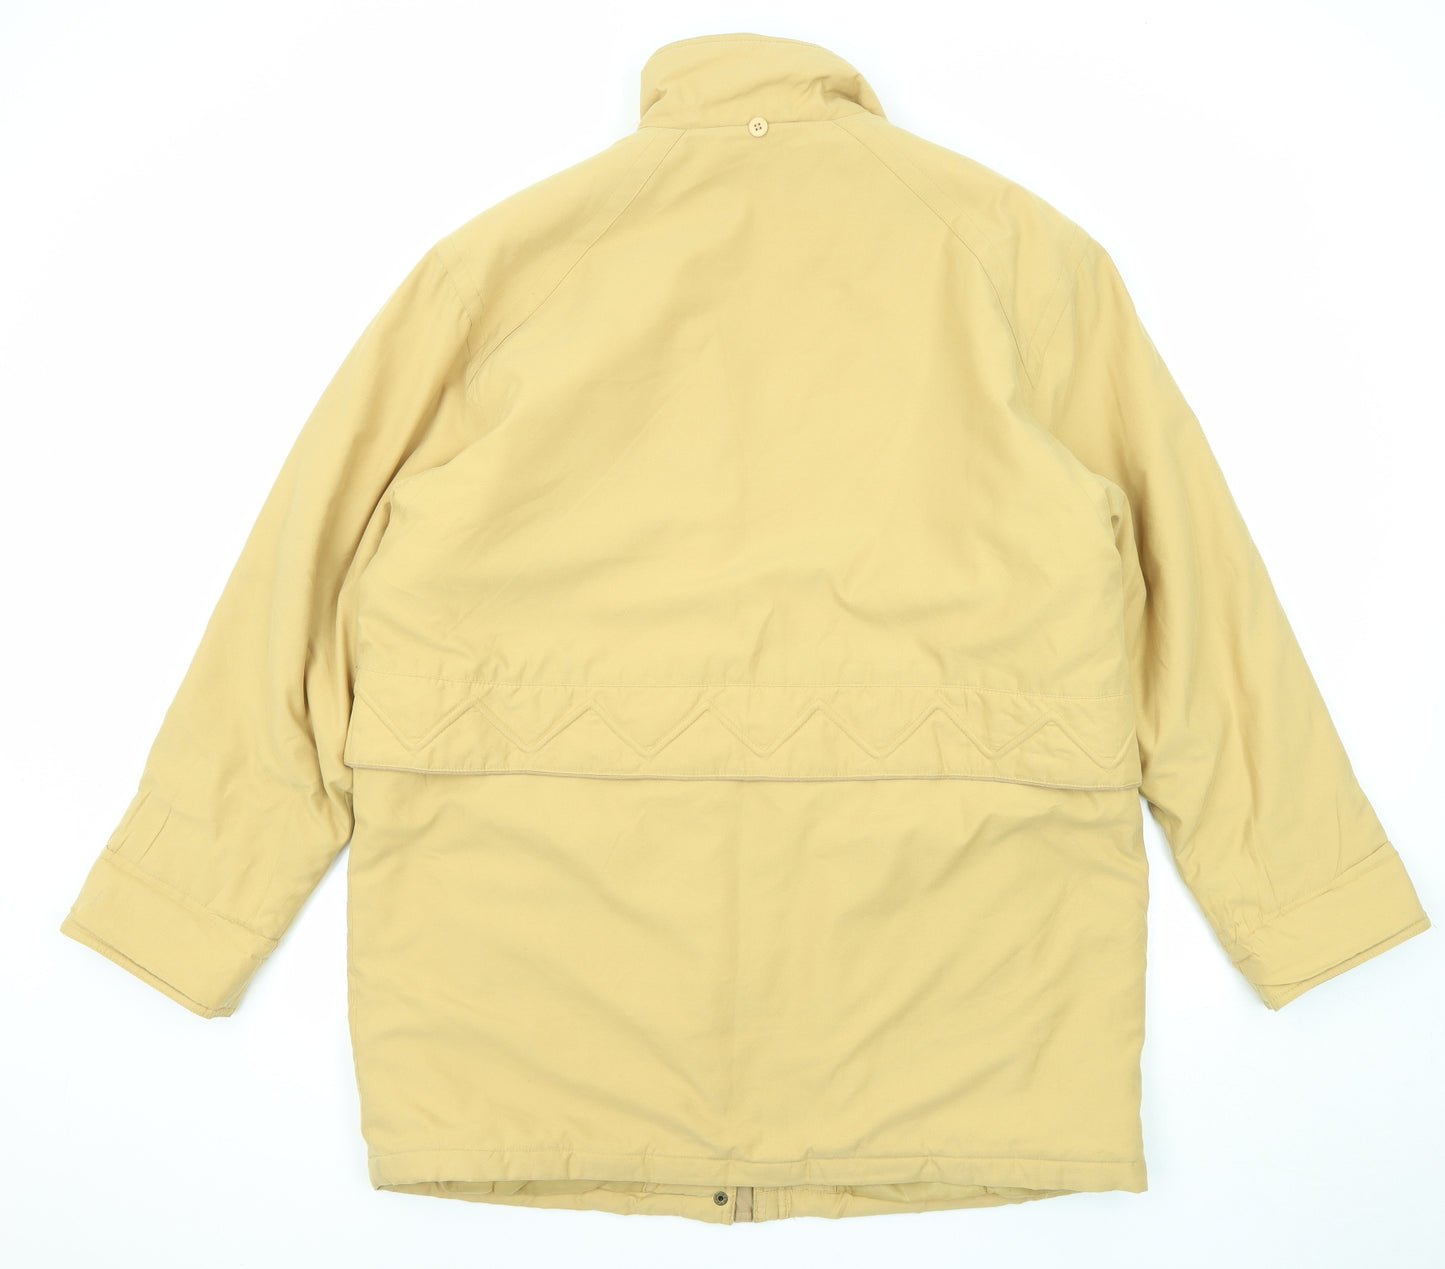 Compliments Womens Yellow Jacket Size 16 Zip